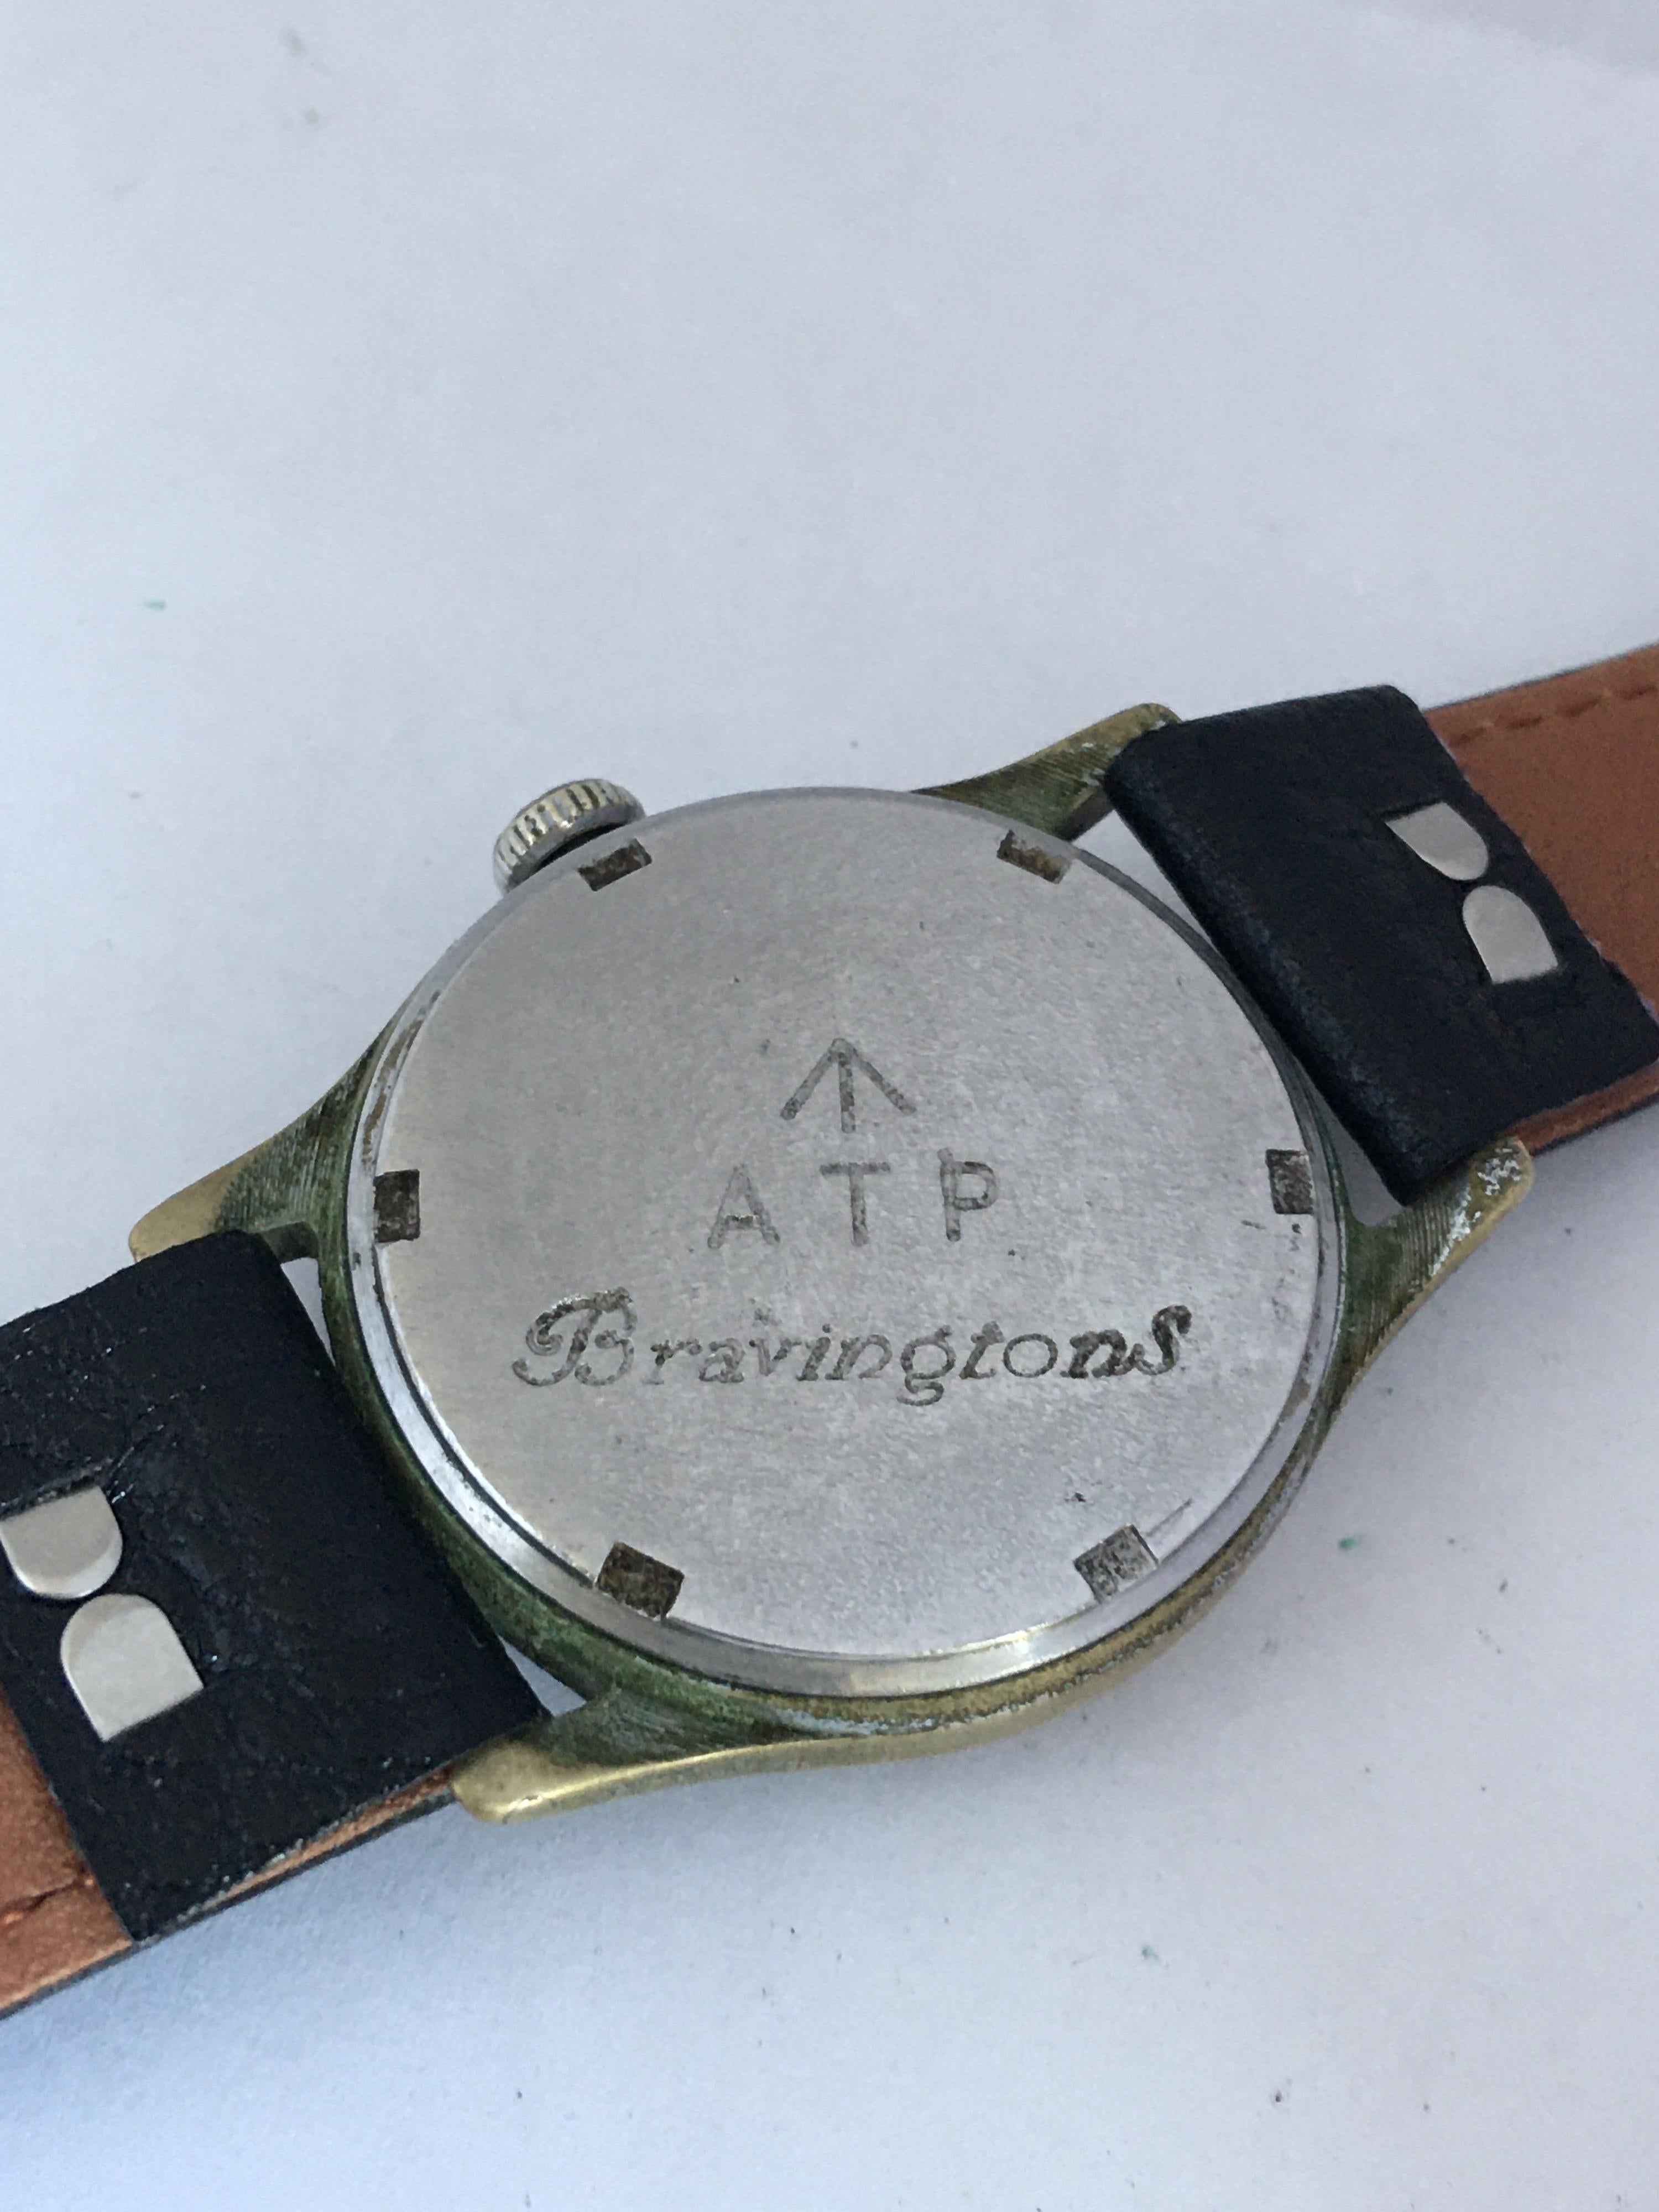 Rare Vintage Manual Winding ATP Bravingtons Supplied Military Watch For Sale 1